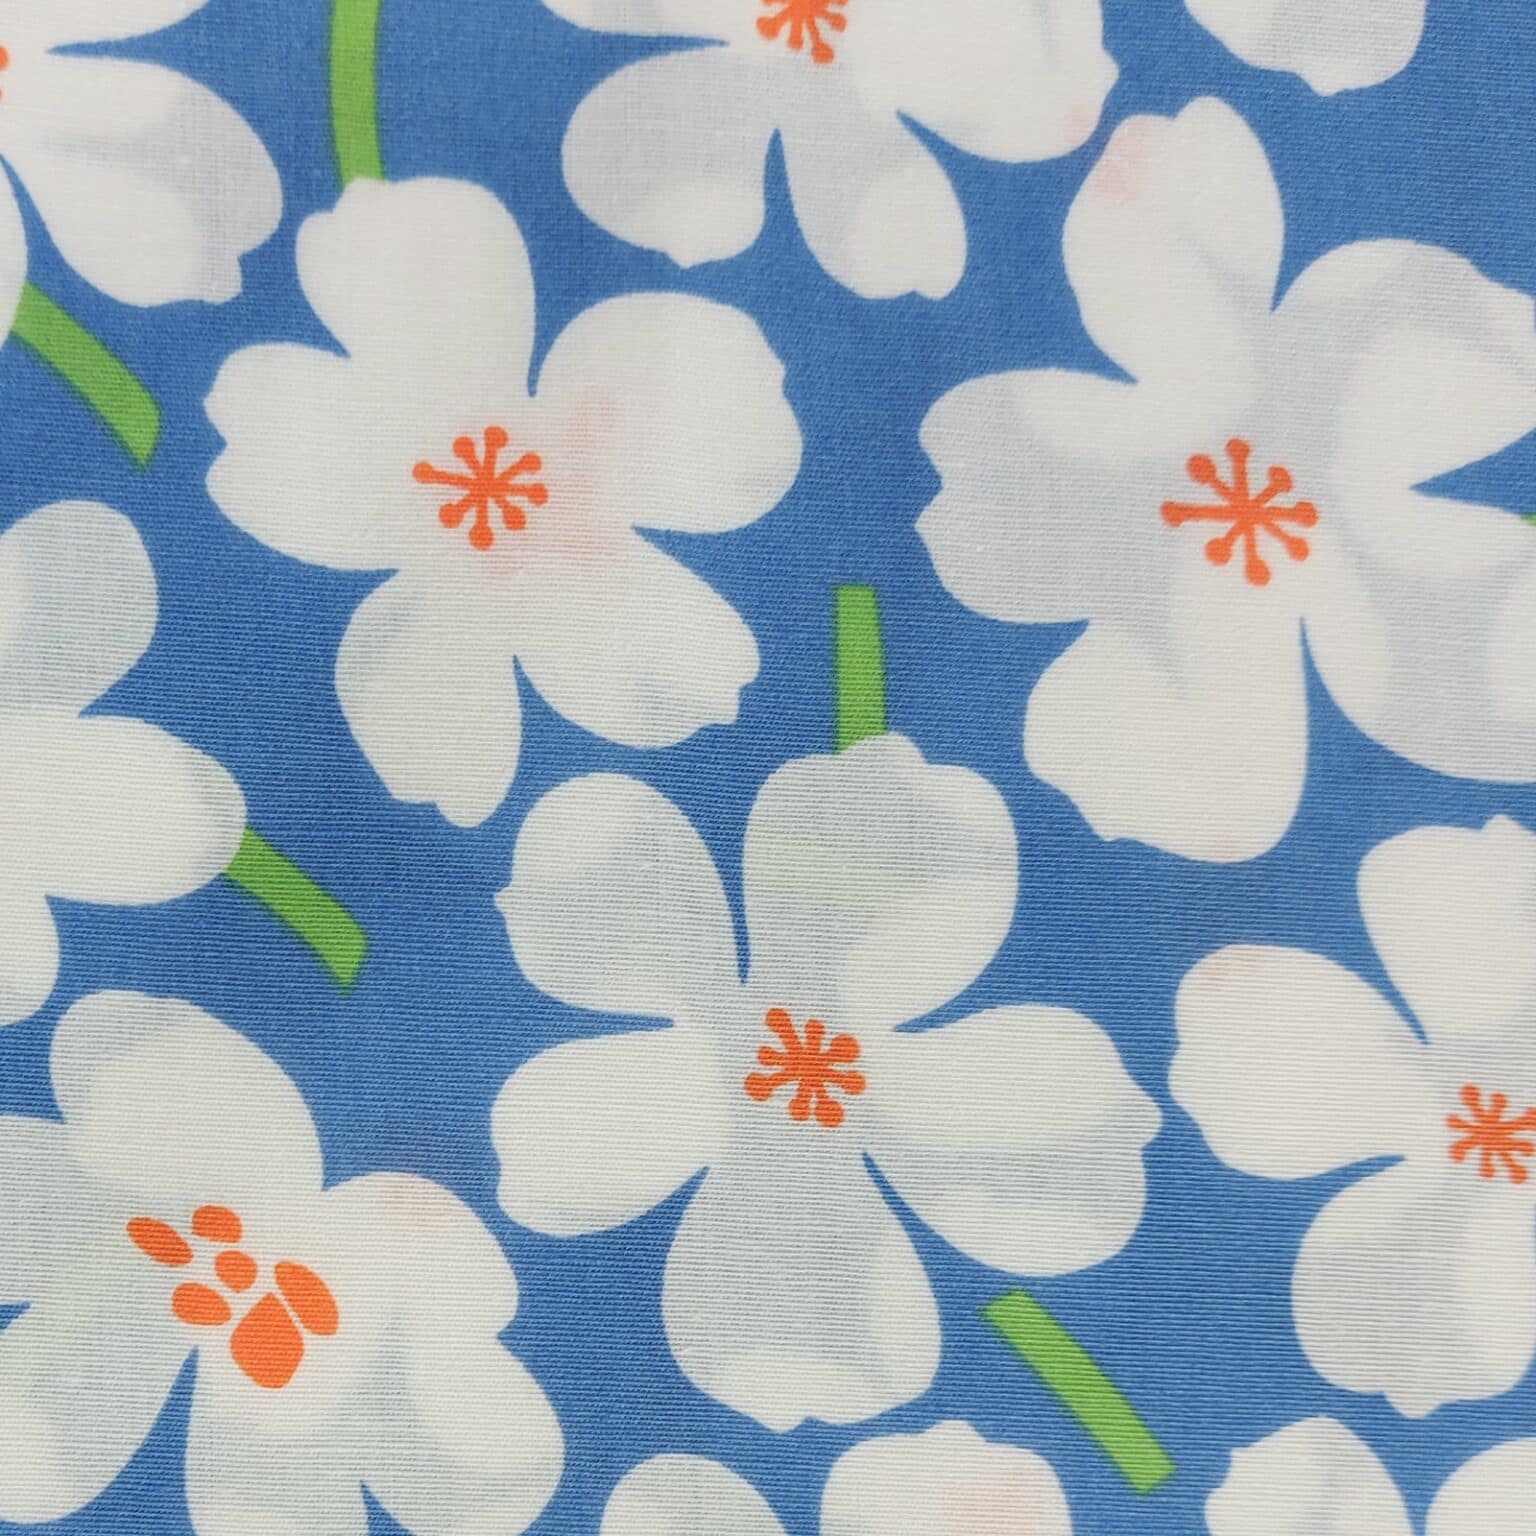 Whtie florwer on blue cotton fabric at More Sewing